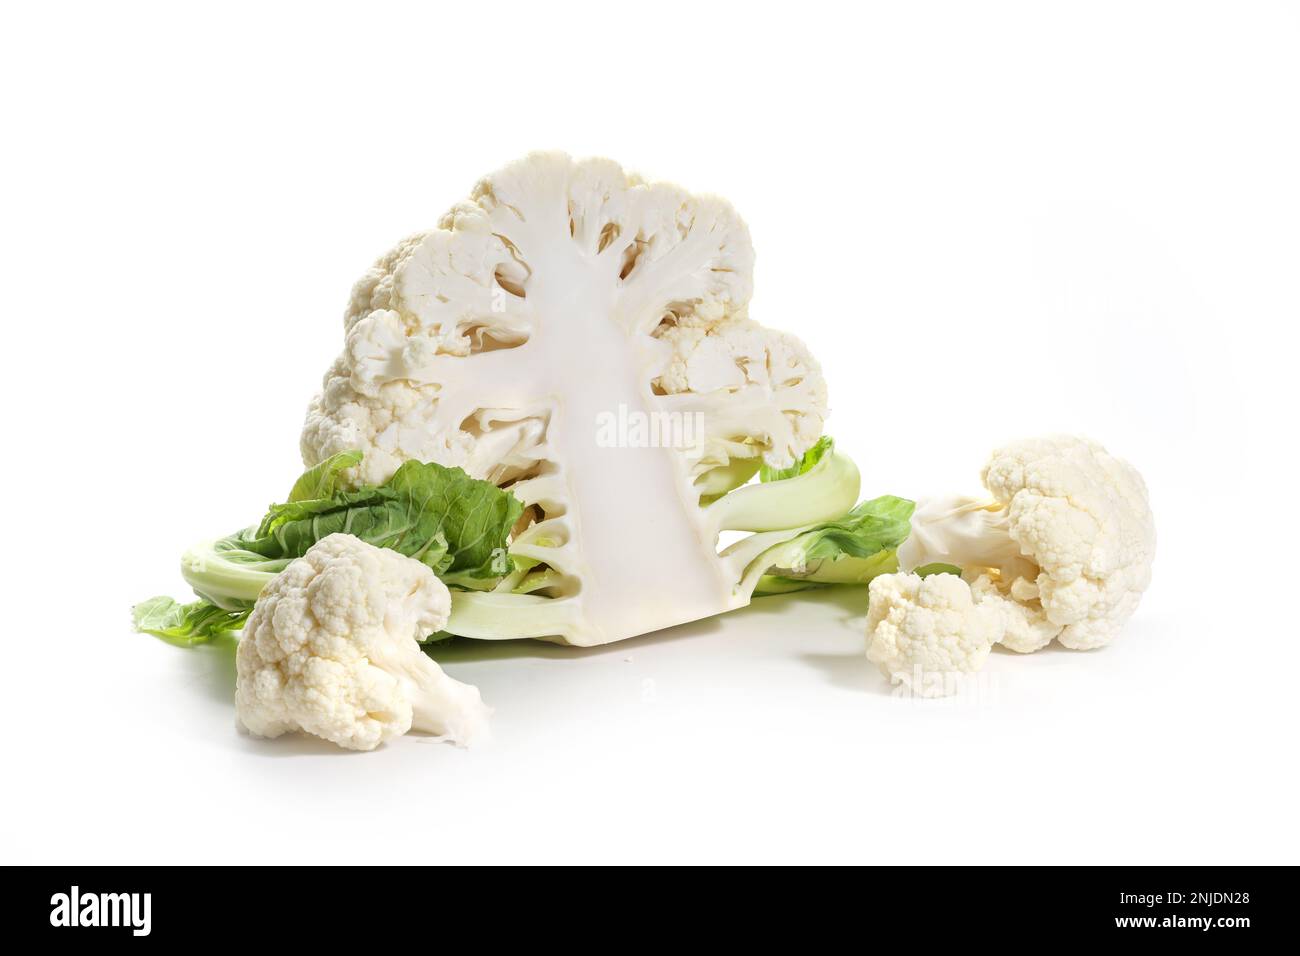 Halved cauliflower and two pieces or florets, healthy vegetable ingredient, food and cooking concept, isolated with small shadows on a white backgroun Stock Photo